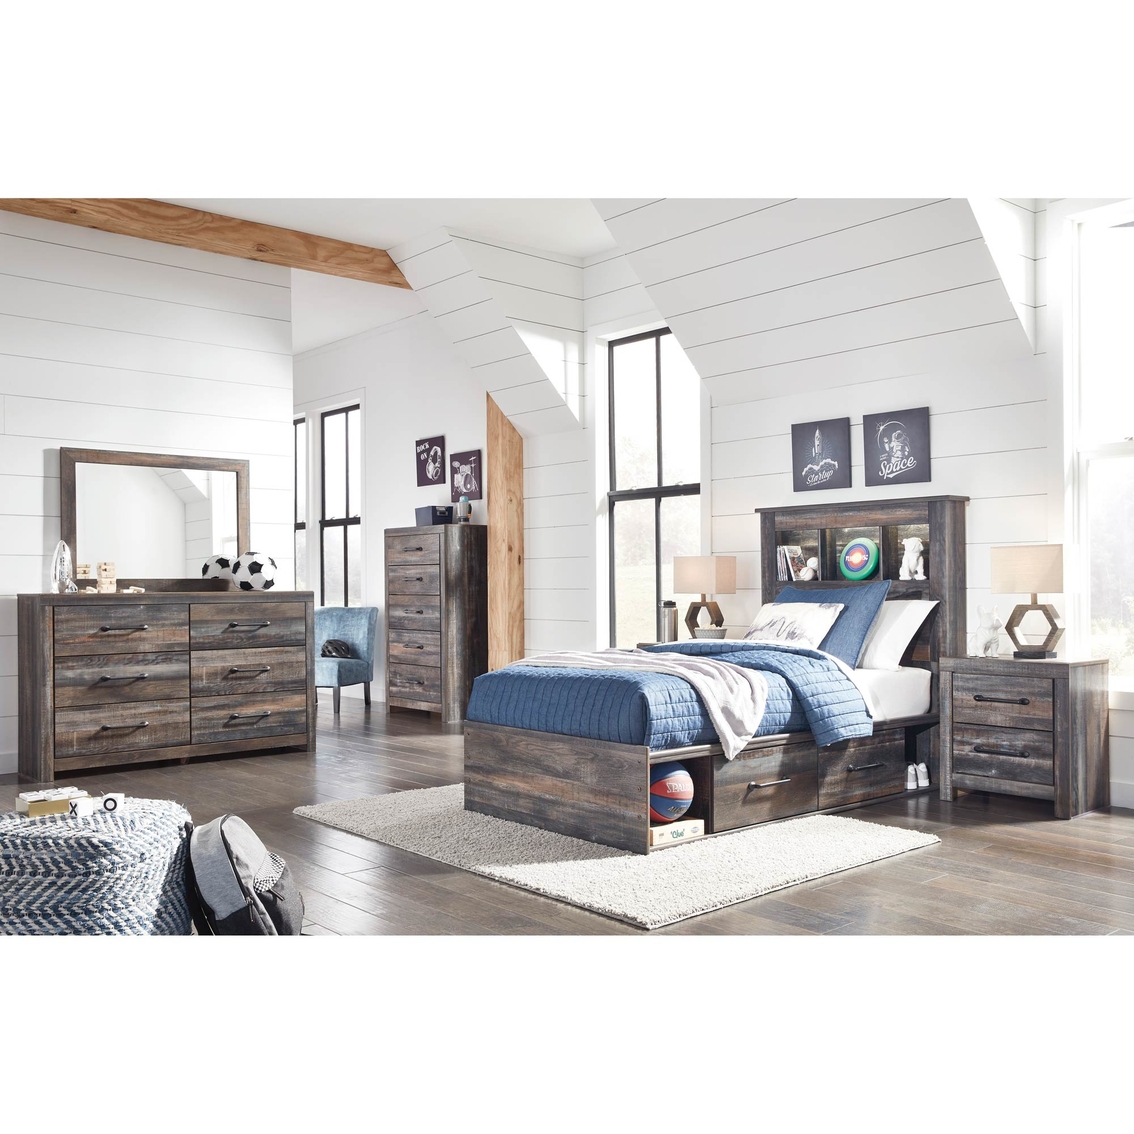 Signature Design by Ashley Drystan Bookcase Headboard Bed with 2 Side Storage Units - Image 8 of 8